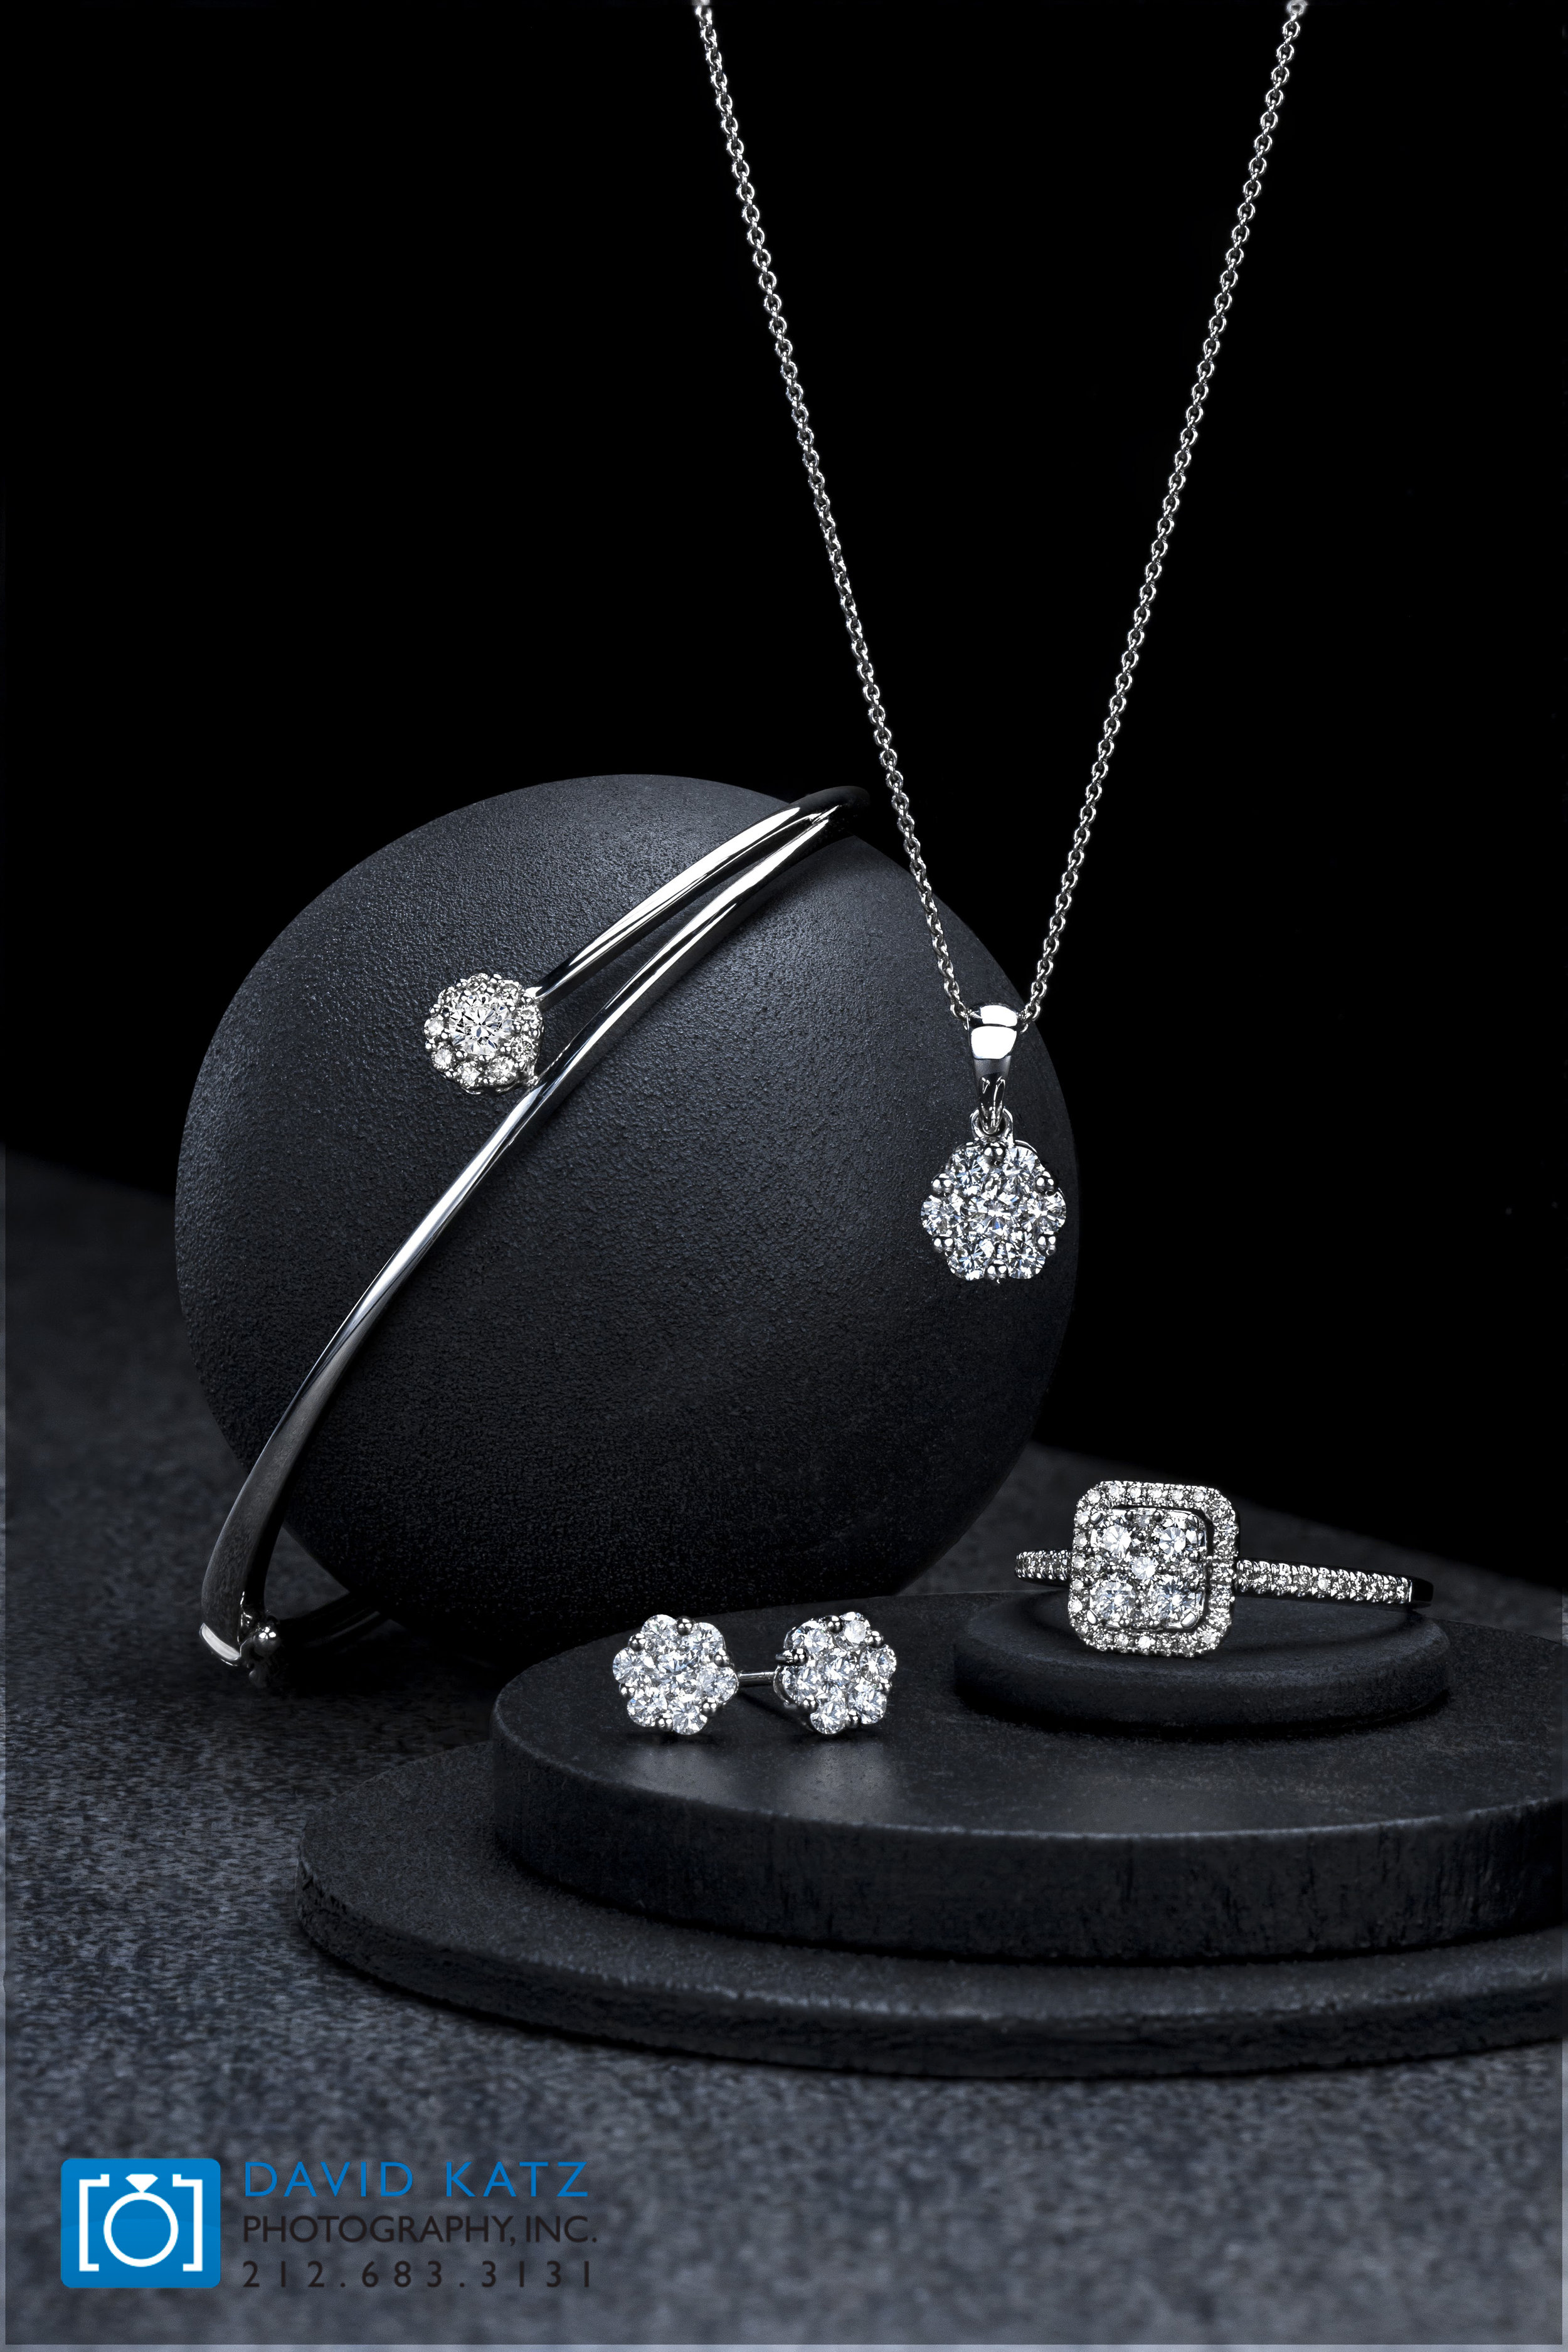 Jewelry Lifestyle Group on Stone and Balls.jpg